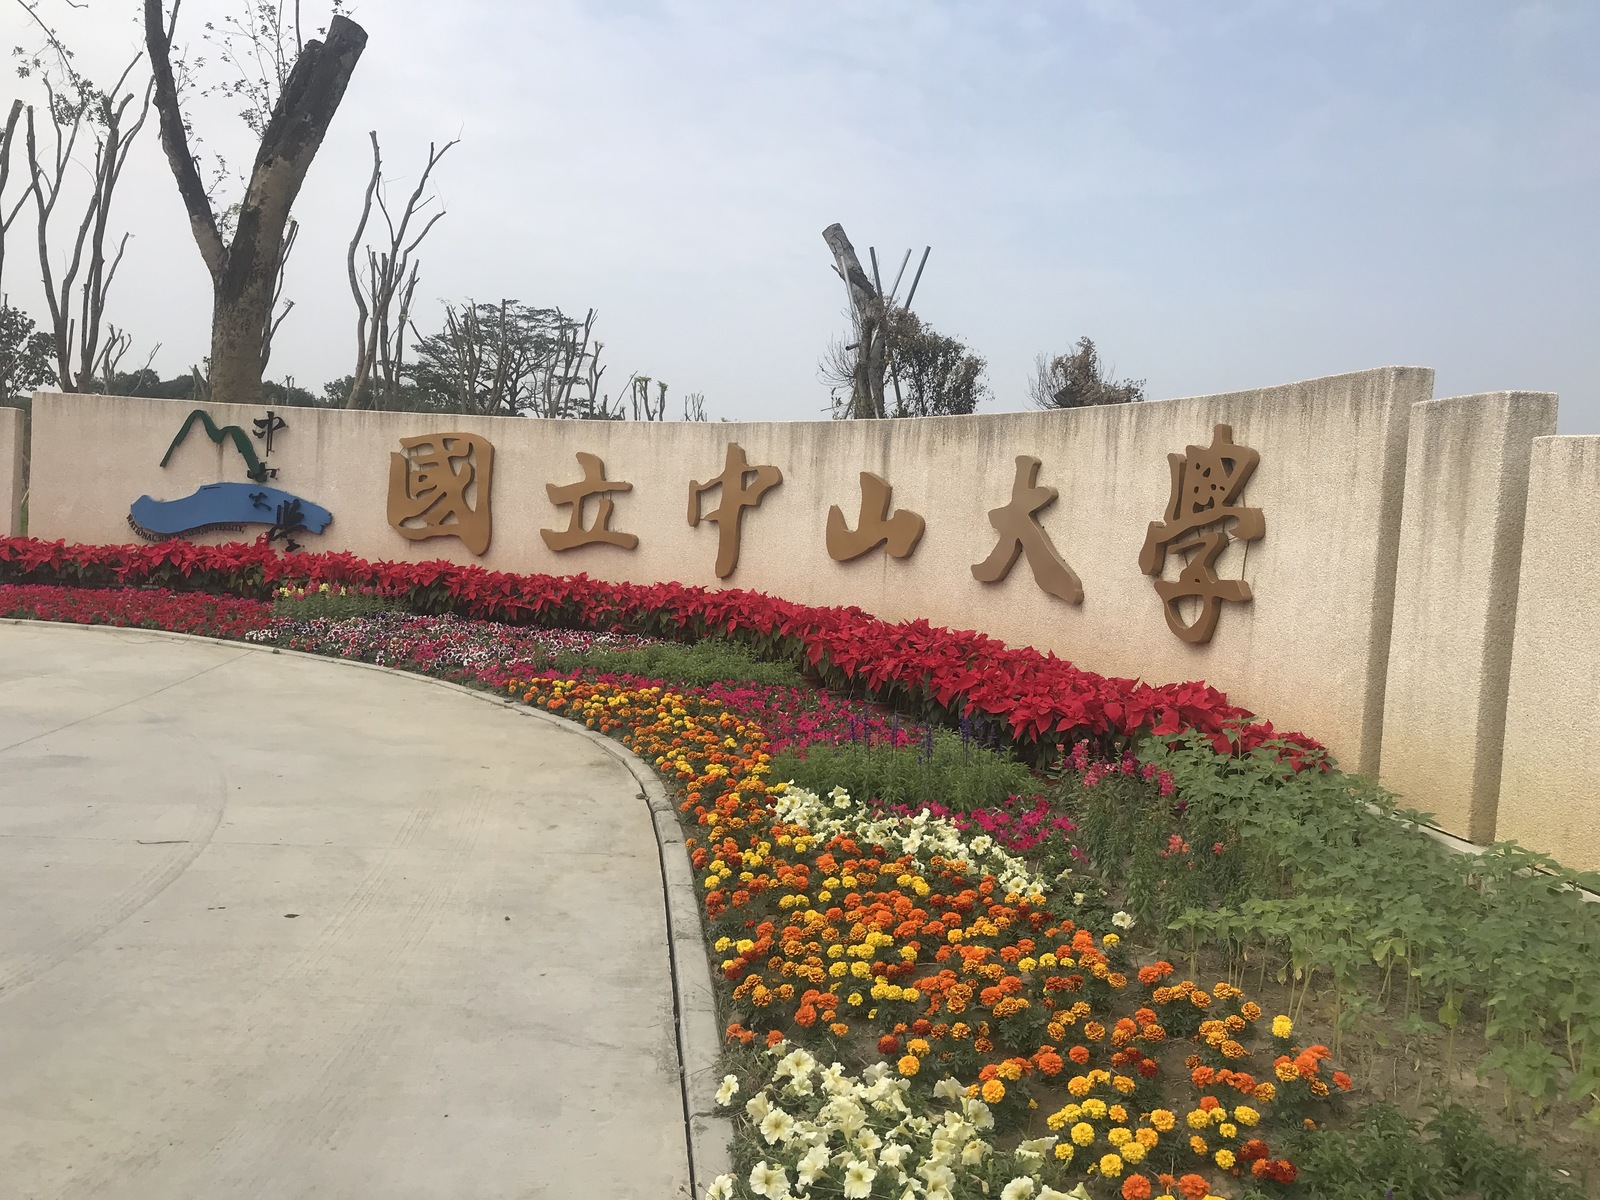 NSYSU, Kaohsiung City Government transform Renwu campus into recreational area for Chinese New Year